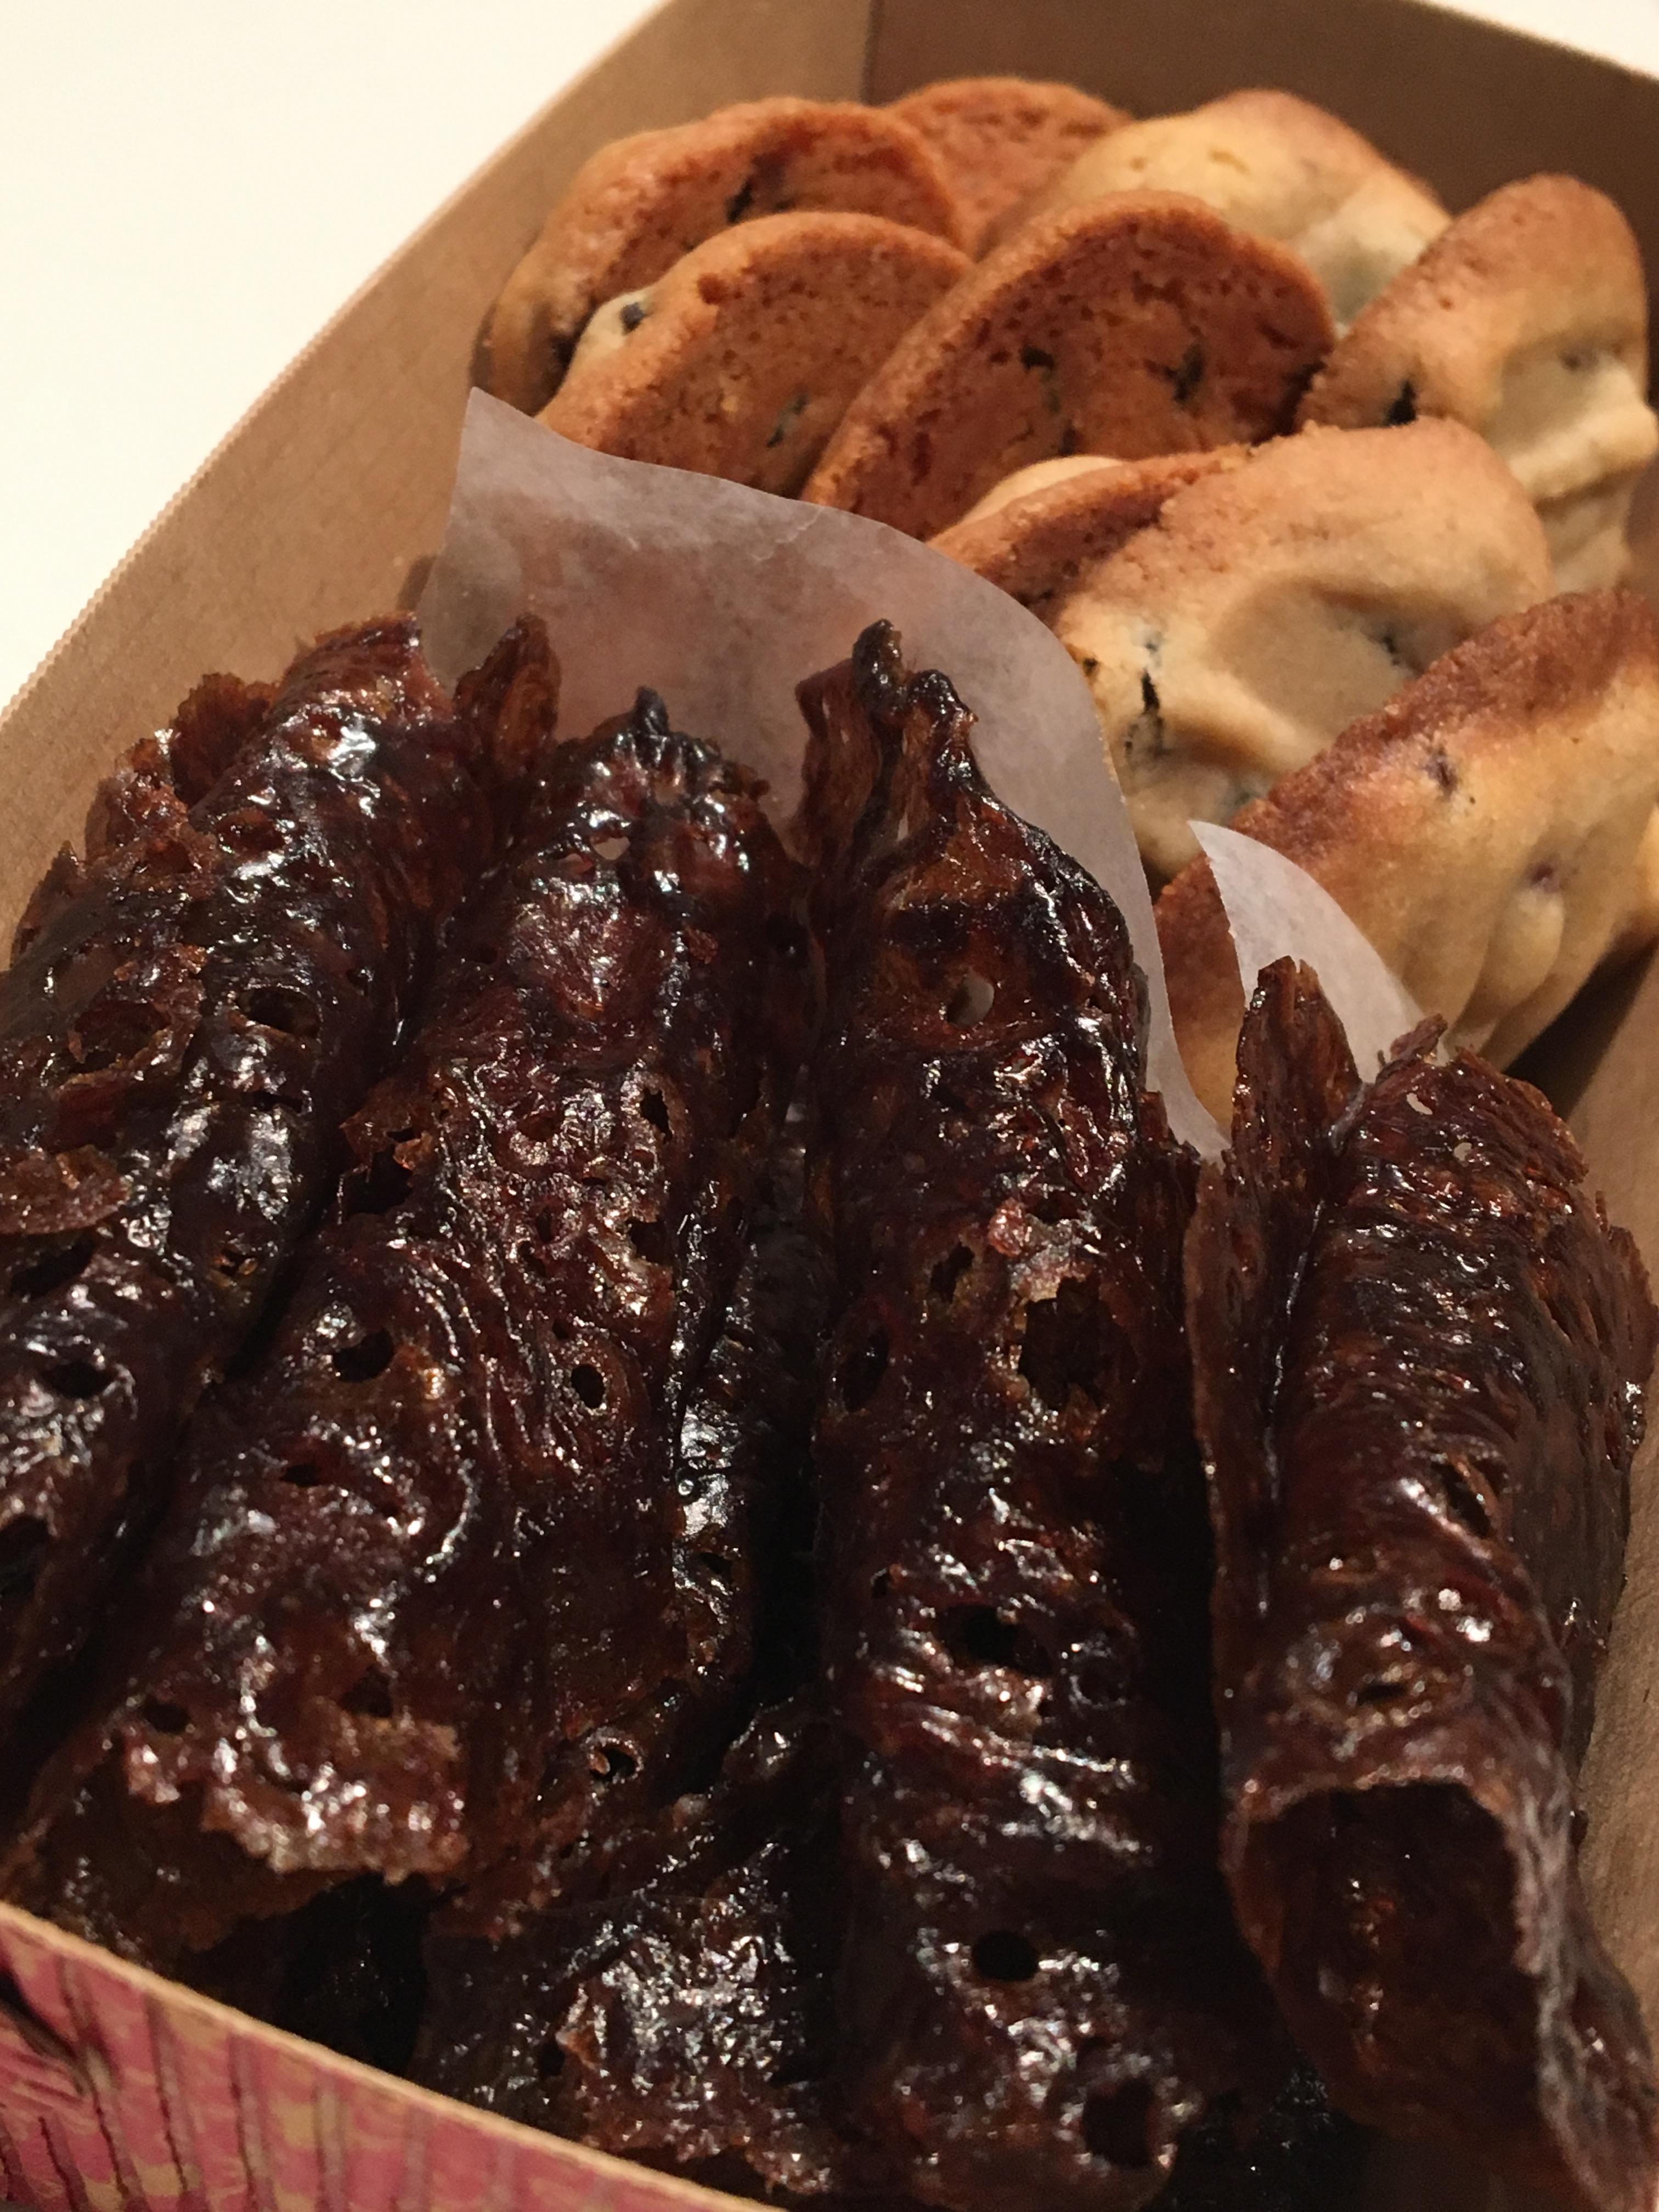 A cardboard loaf box is packed full of currant cookies and caramelized dark brown folded cookies.